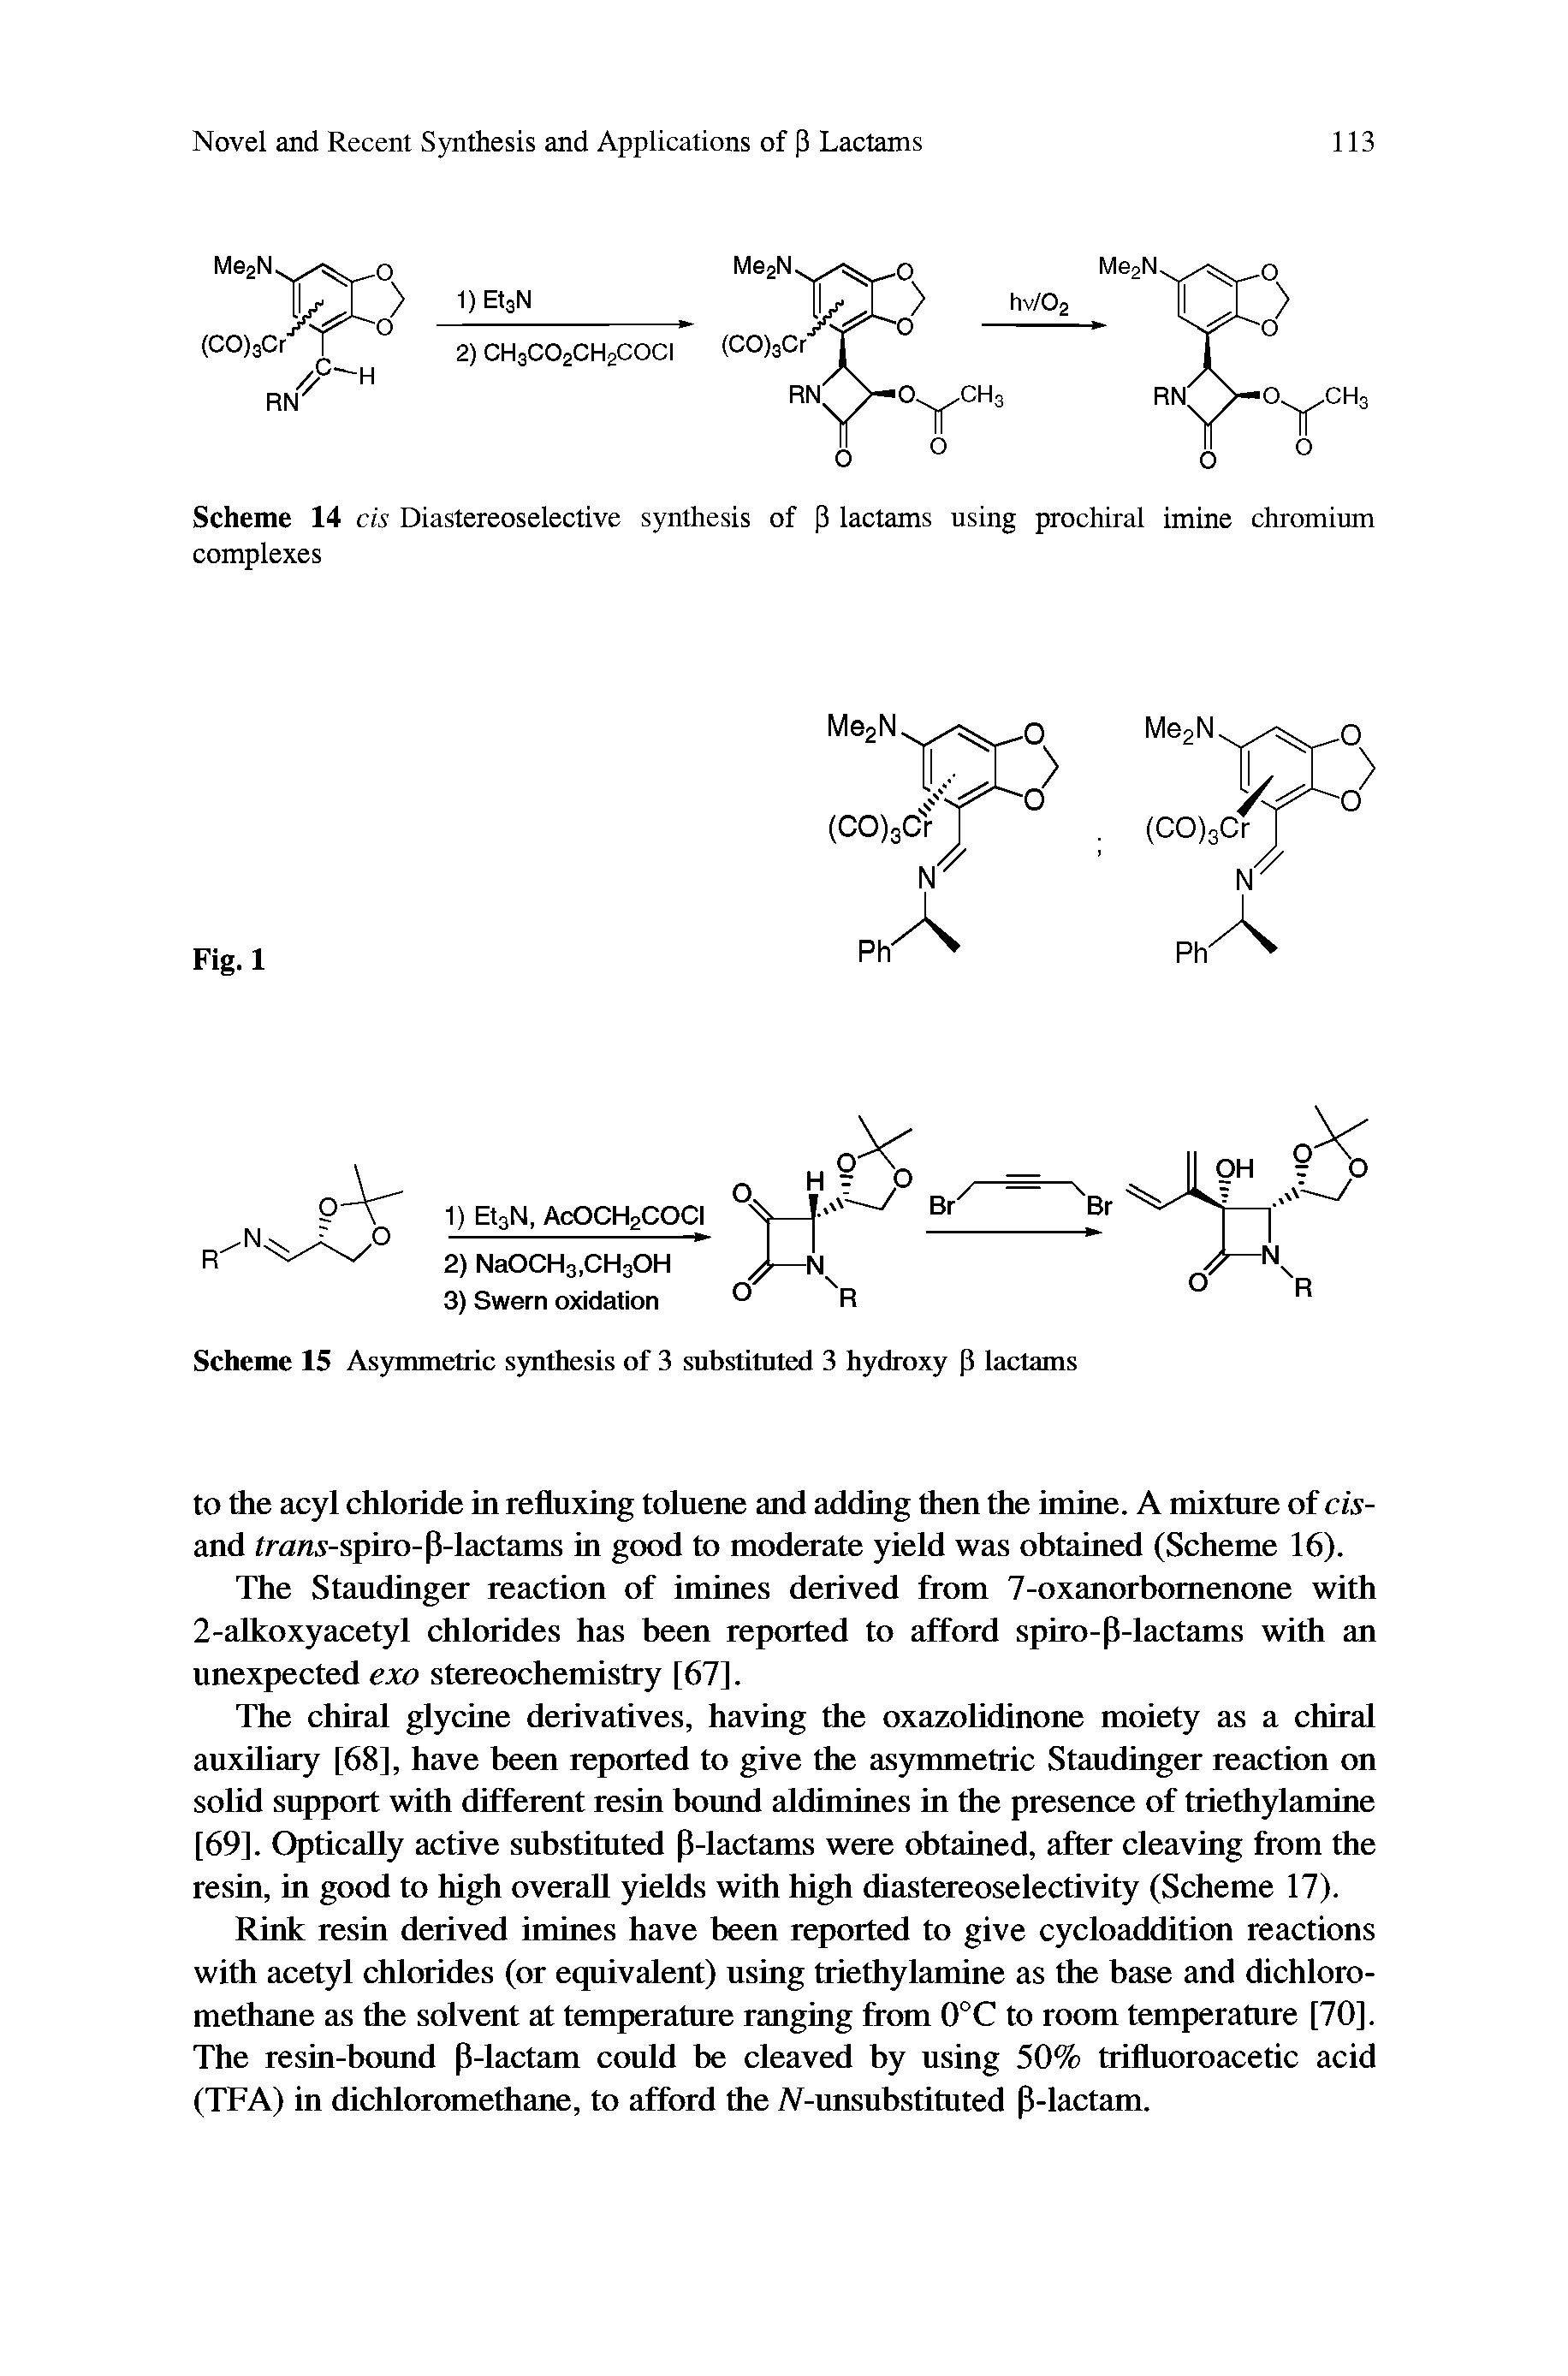 Scheme 15 Asymmetric synthesis of 3 substituted 3 hydroxy P lactams...